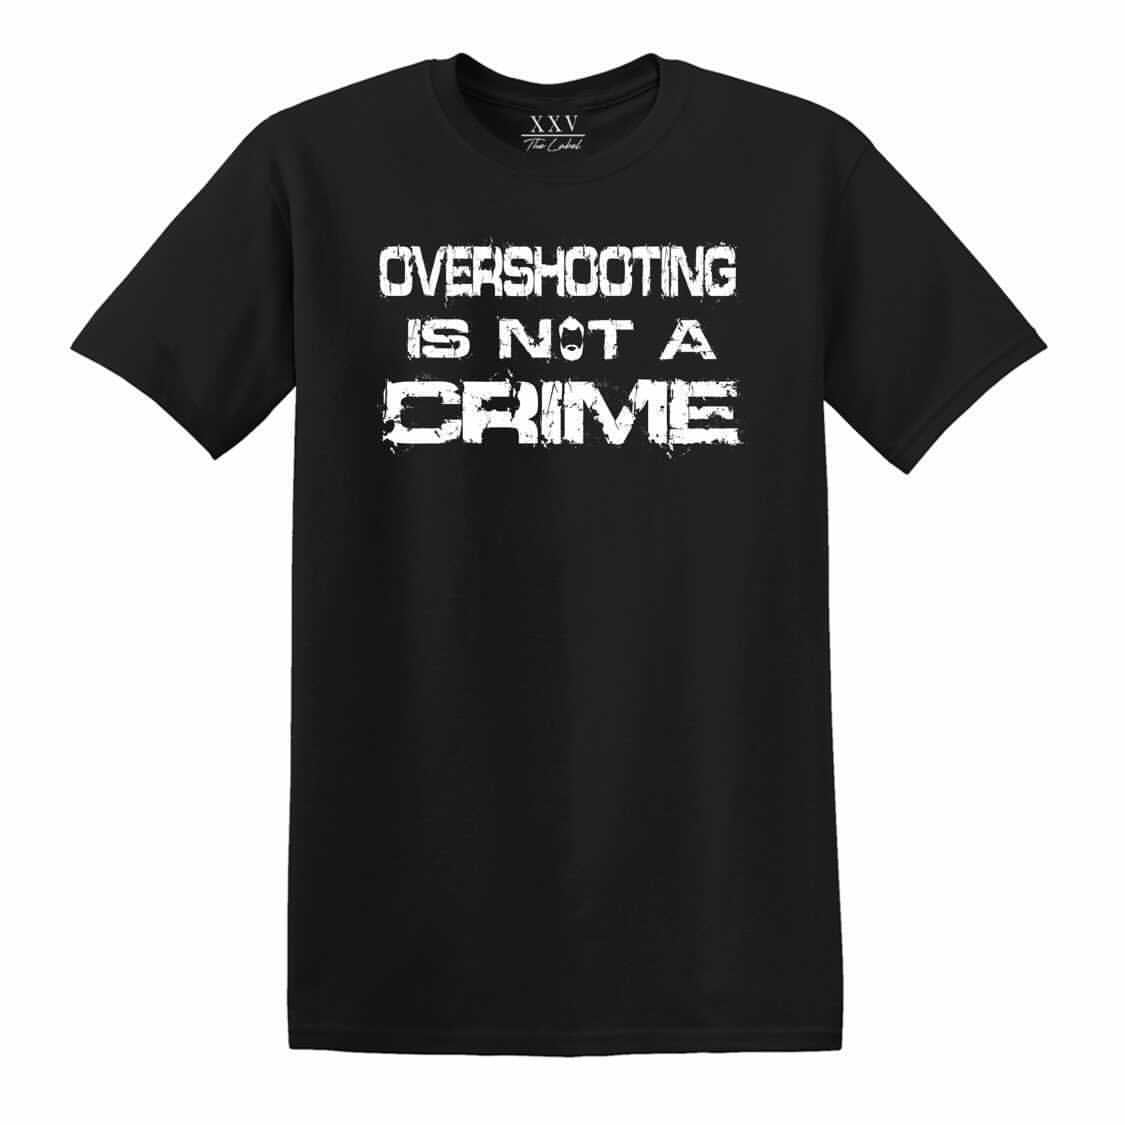 Overshooting is not a Crime - Black